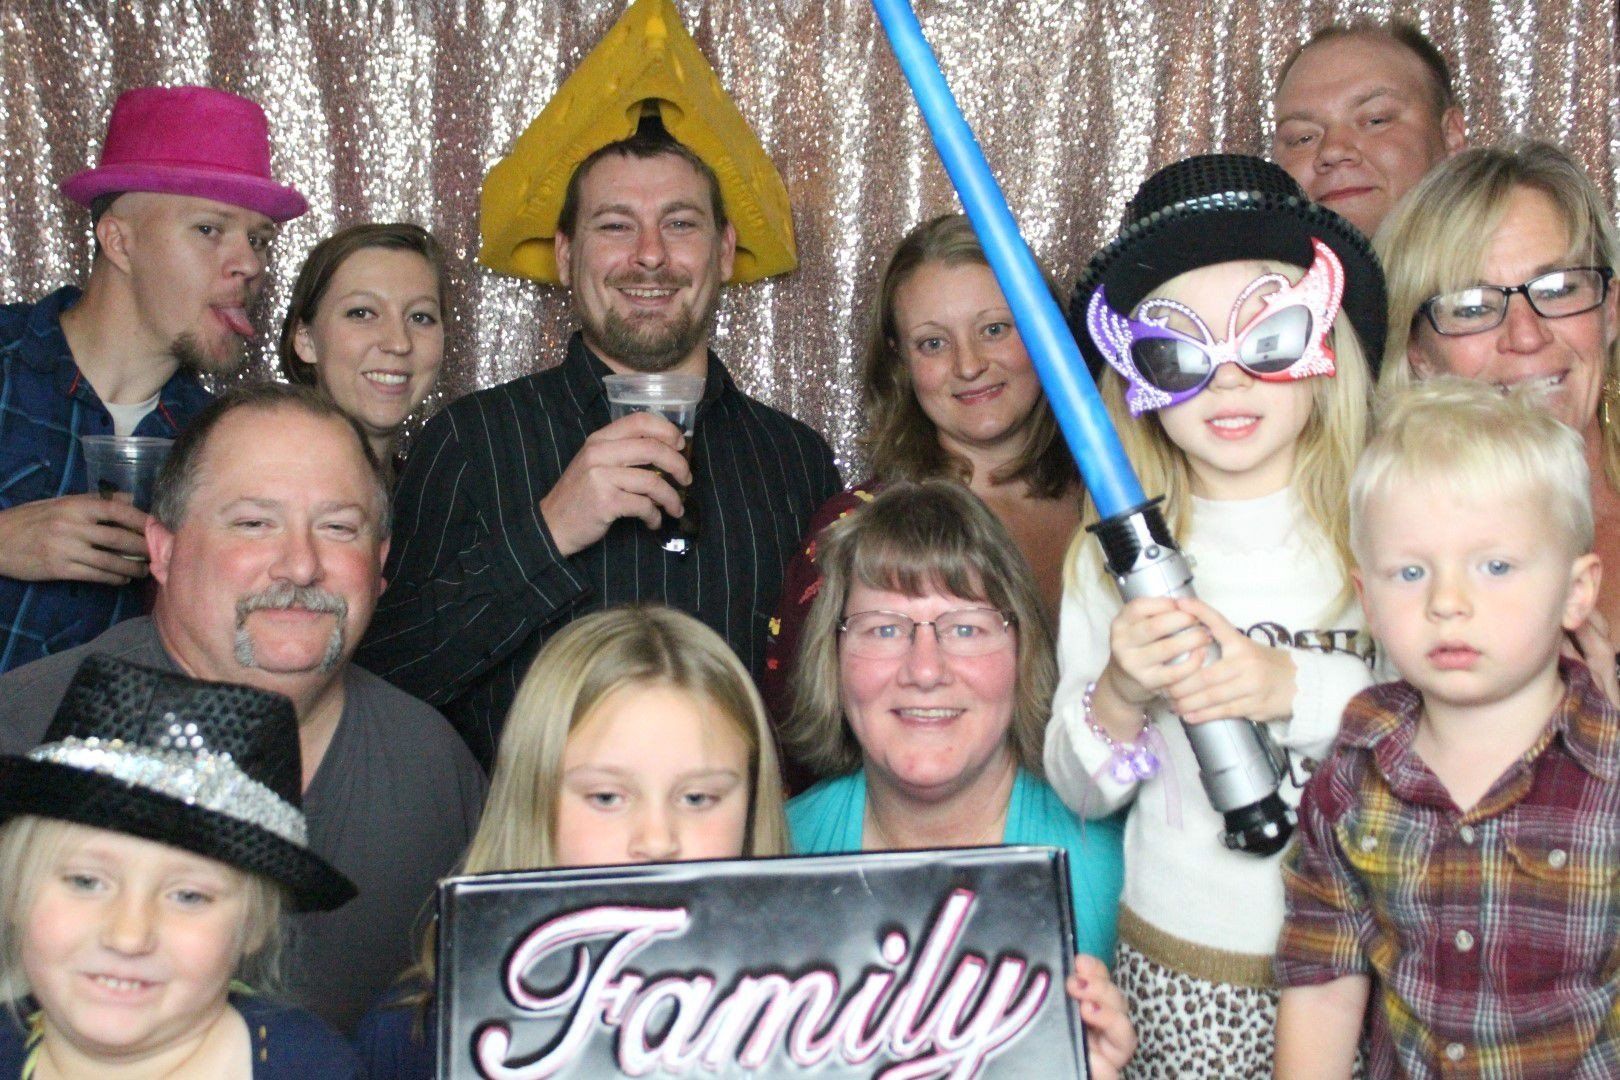 Photo Booth Fun, Wisconsin Dells Photo Booth, Sound Sensations Entertainment Photo Booths